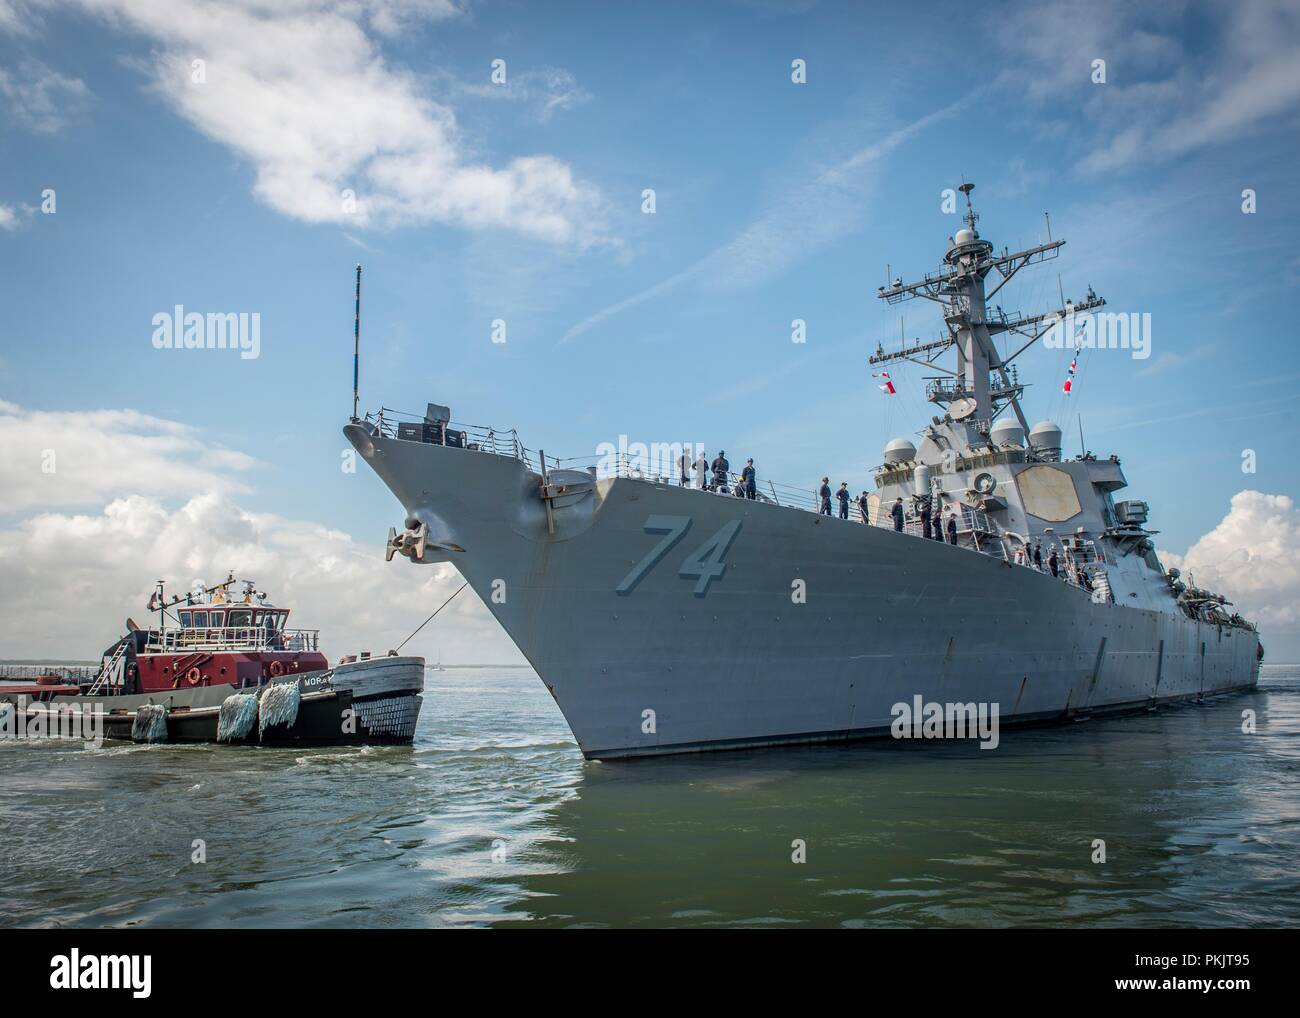 The U.S. Navy guided-missile destroyer USS McFaul departs Naval Station Norfolk in preparation for possible impact to the region by Hurricane Florence September 11, 2018 in Norfolk, Virginia. Commander, U.S. Fleet Forces Command ordered all Navy Ships in the Hampton Roads area to head south away from the oncoming storm to prevent damage to the fleet. Stock Photo